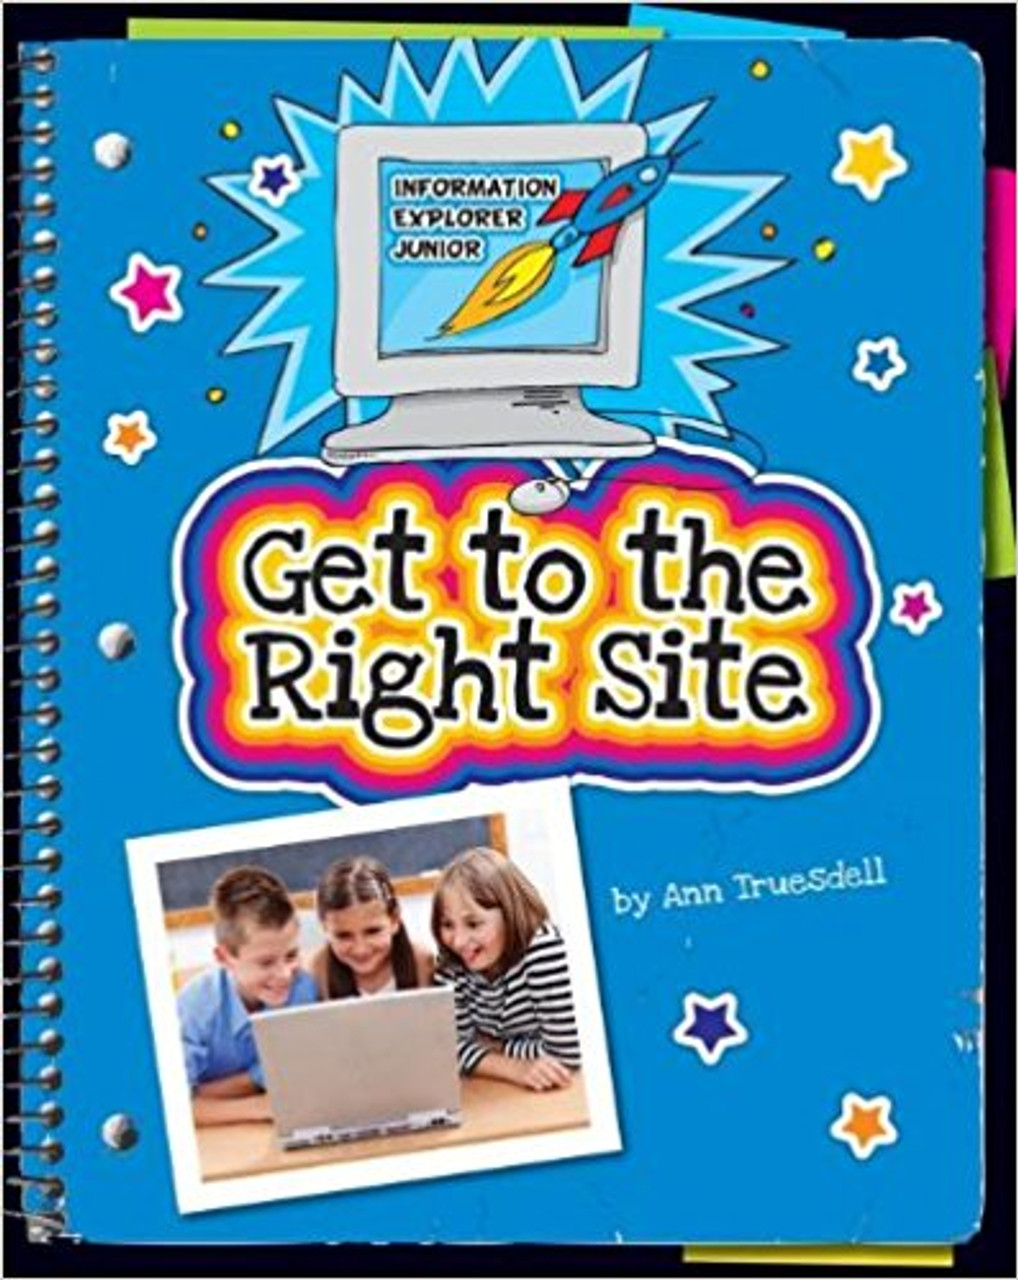 Get to the Right Site by Ann Truesdell